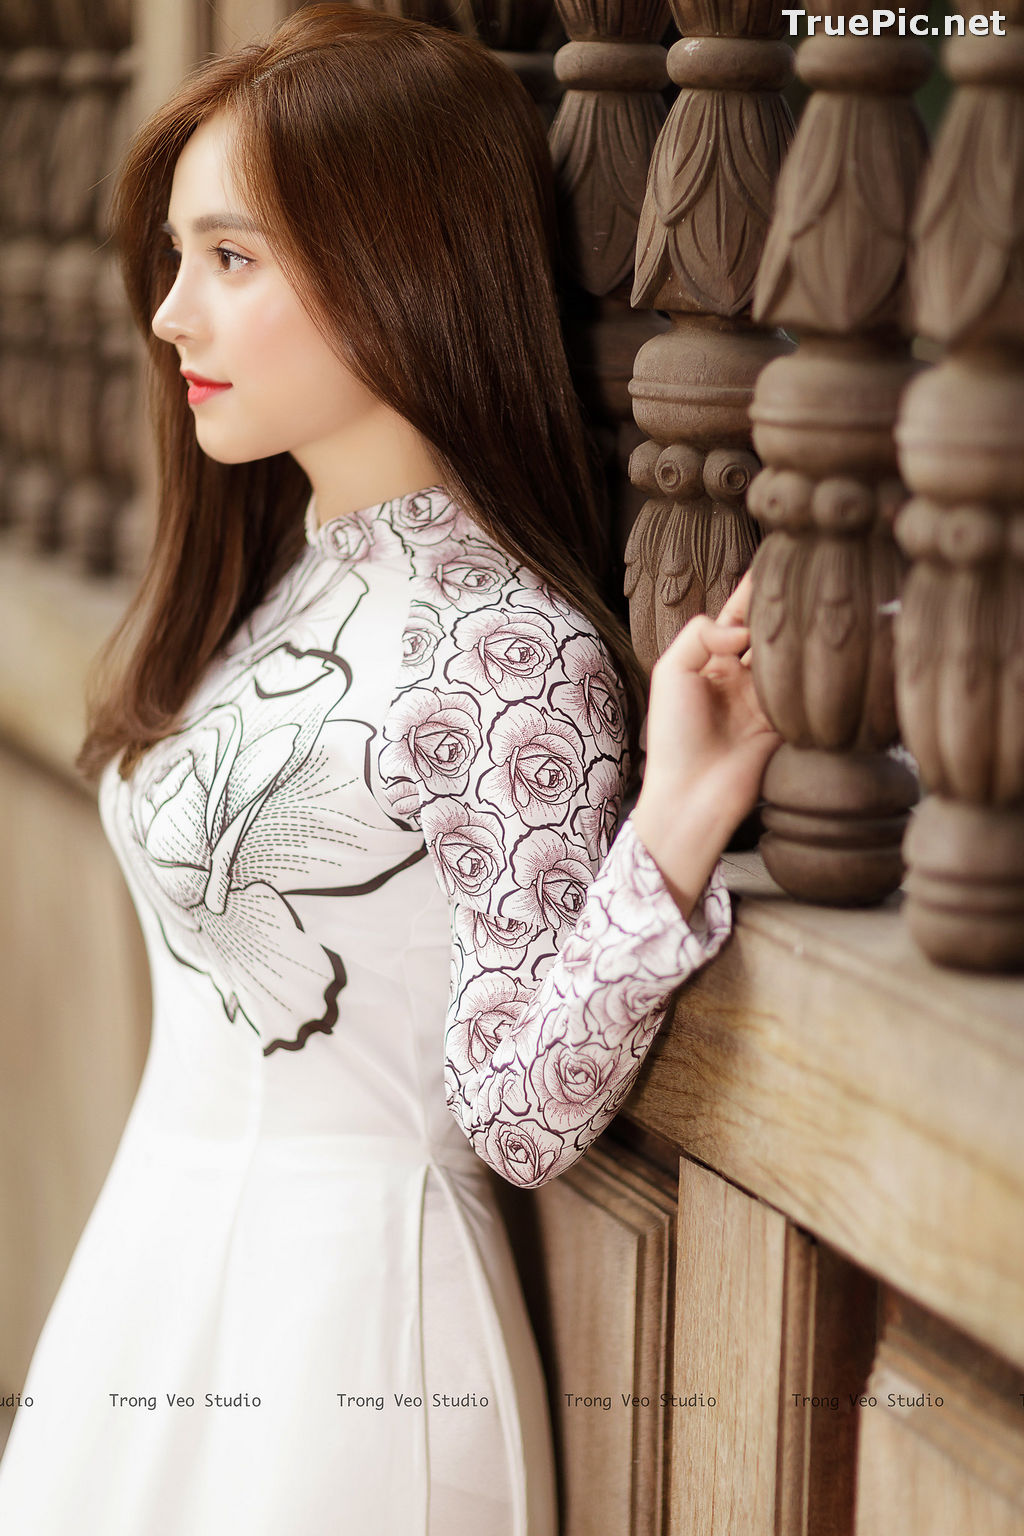 Image The Beauty of Vietnamese Girls with Traditional Dress (Ao Dai) #4 - TruePic.net - Picture-60